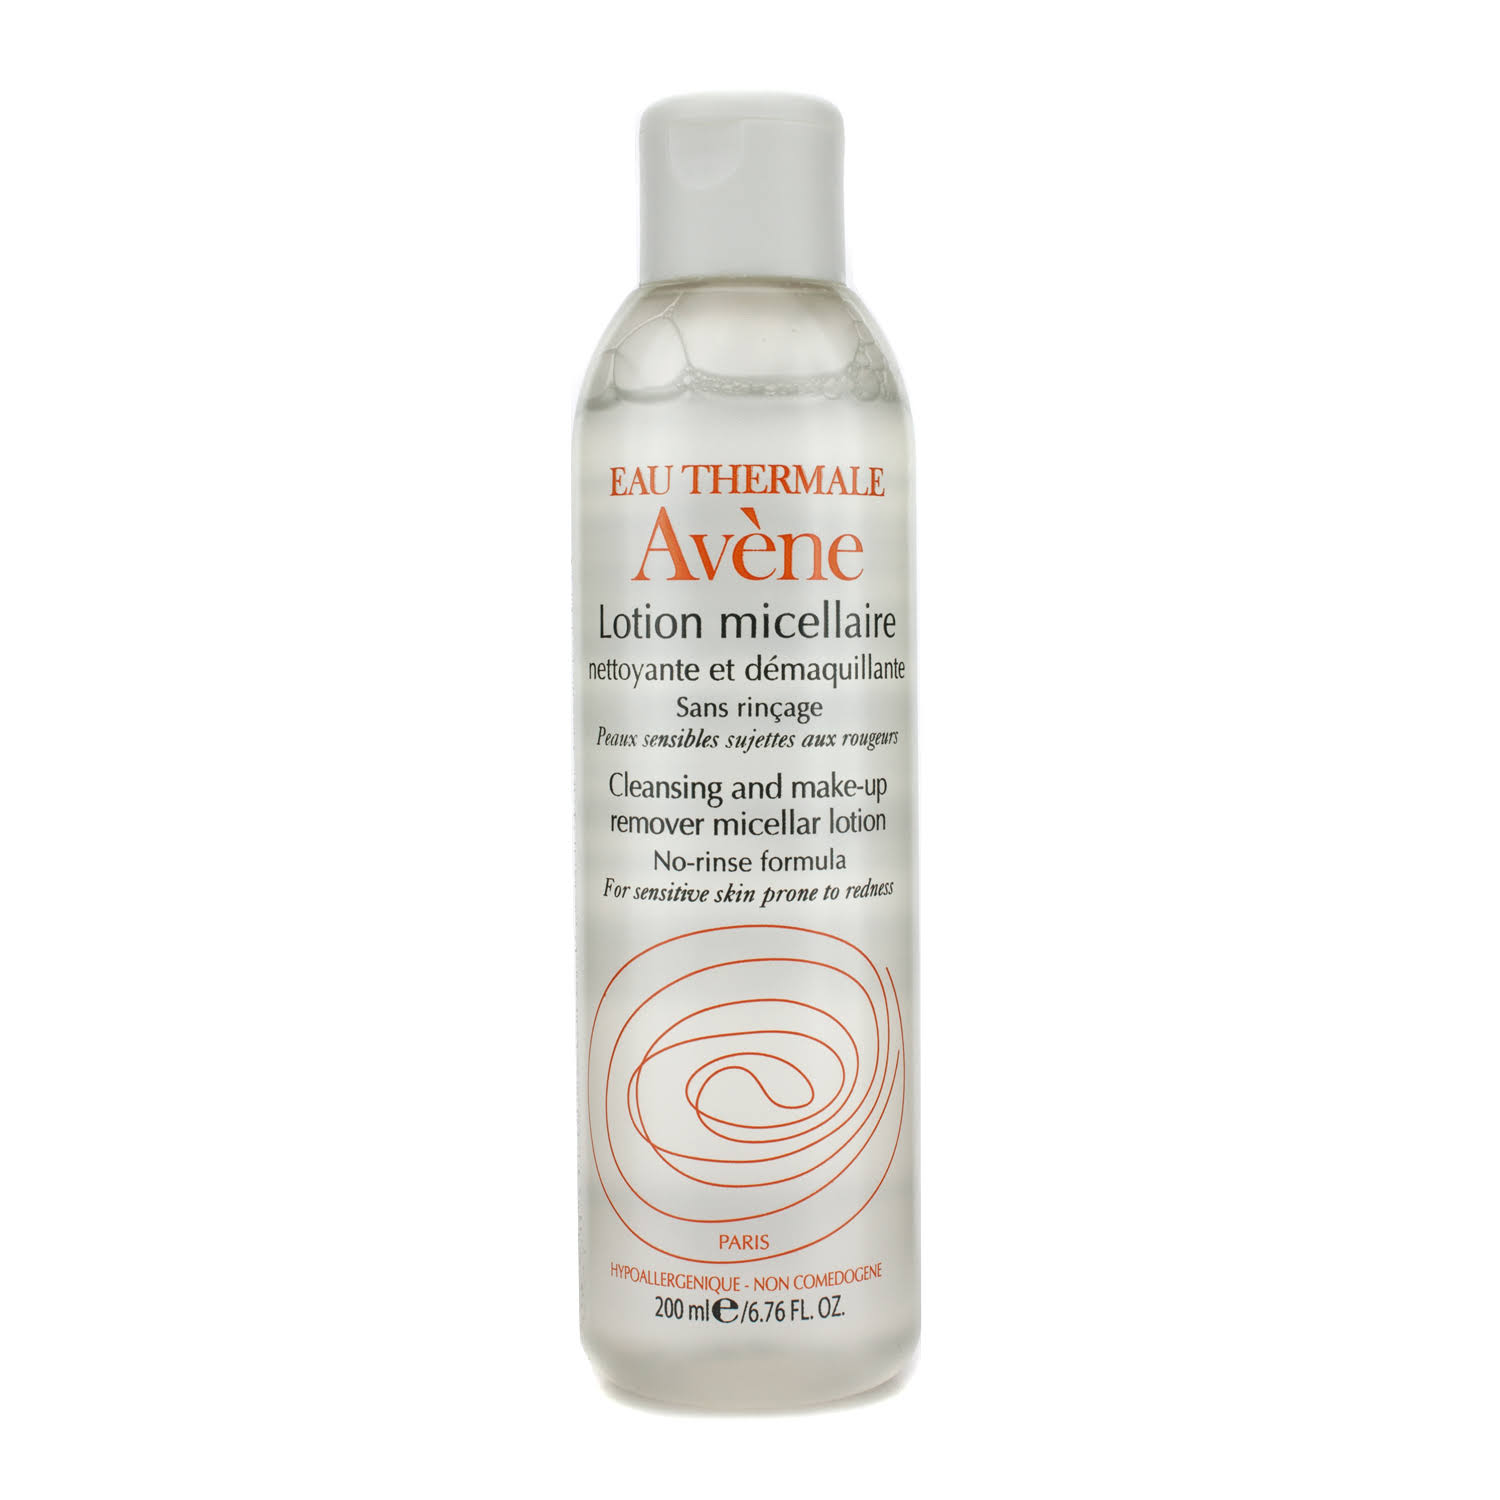 Avene Micellar Lotion Cleanser and Make-Up Remover - 200ml